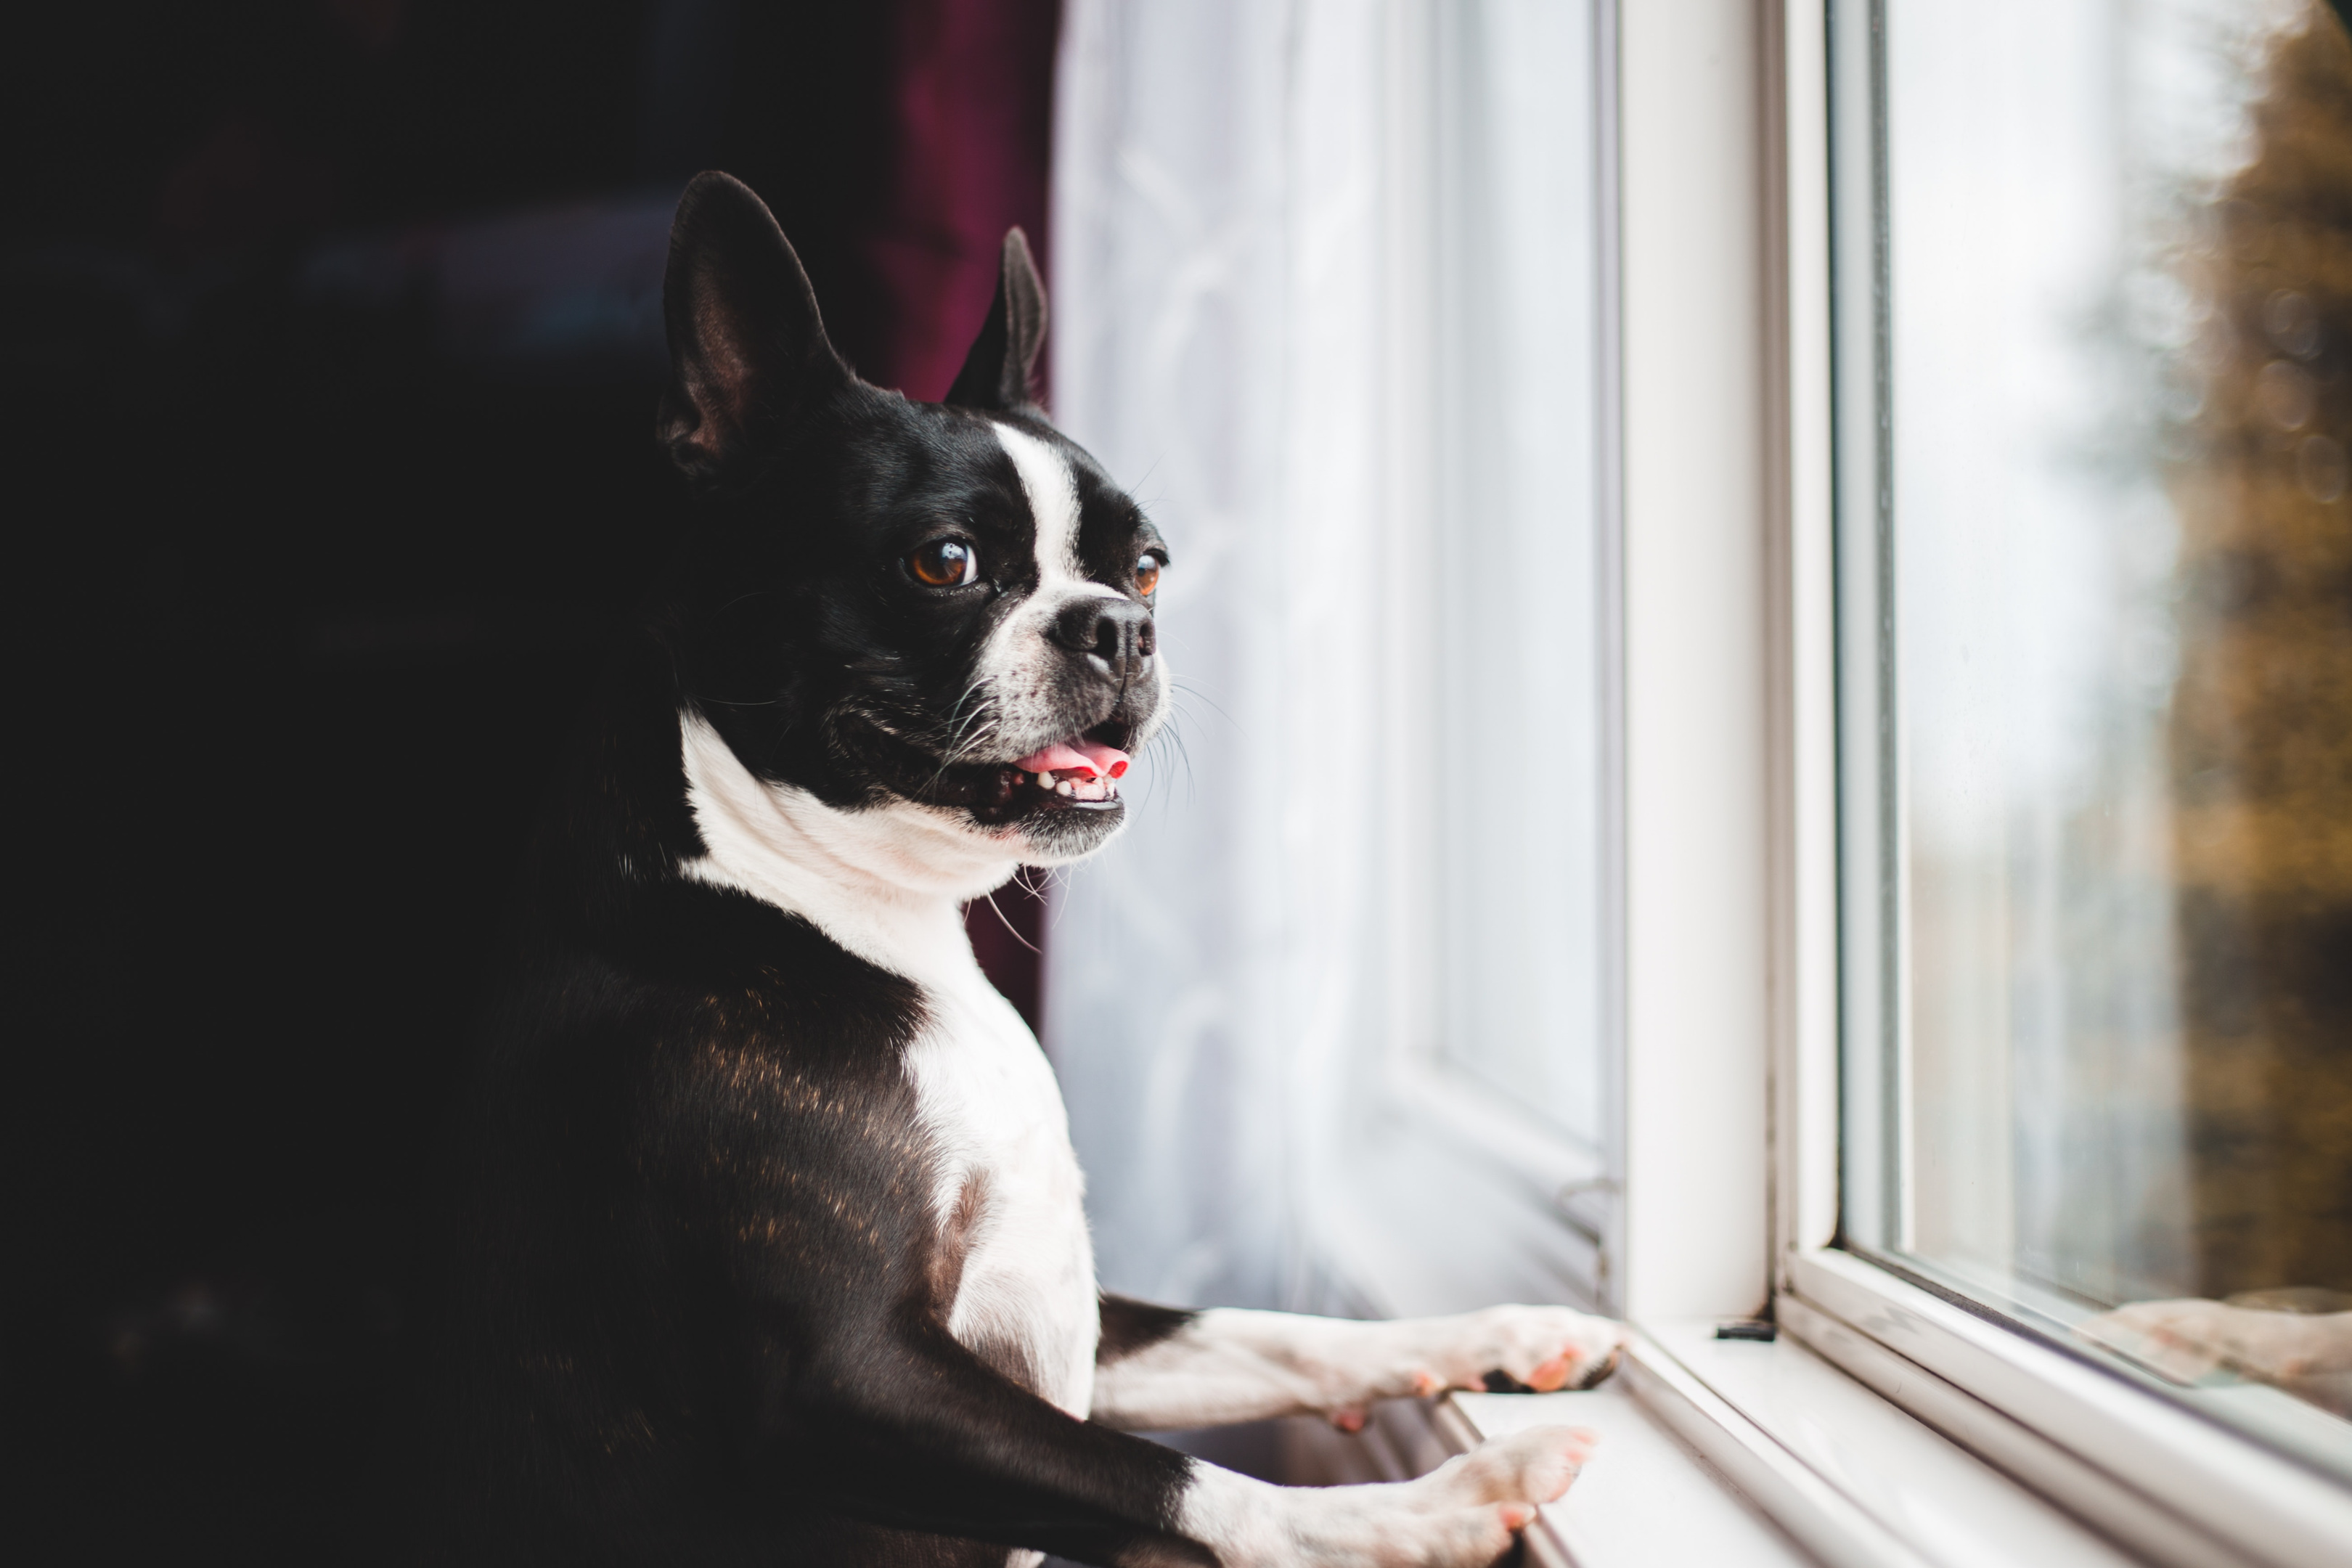 A Boston Terrier looking out the window.